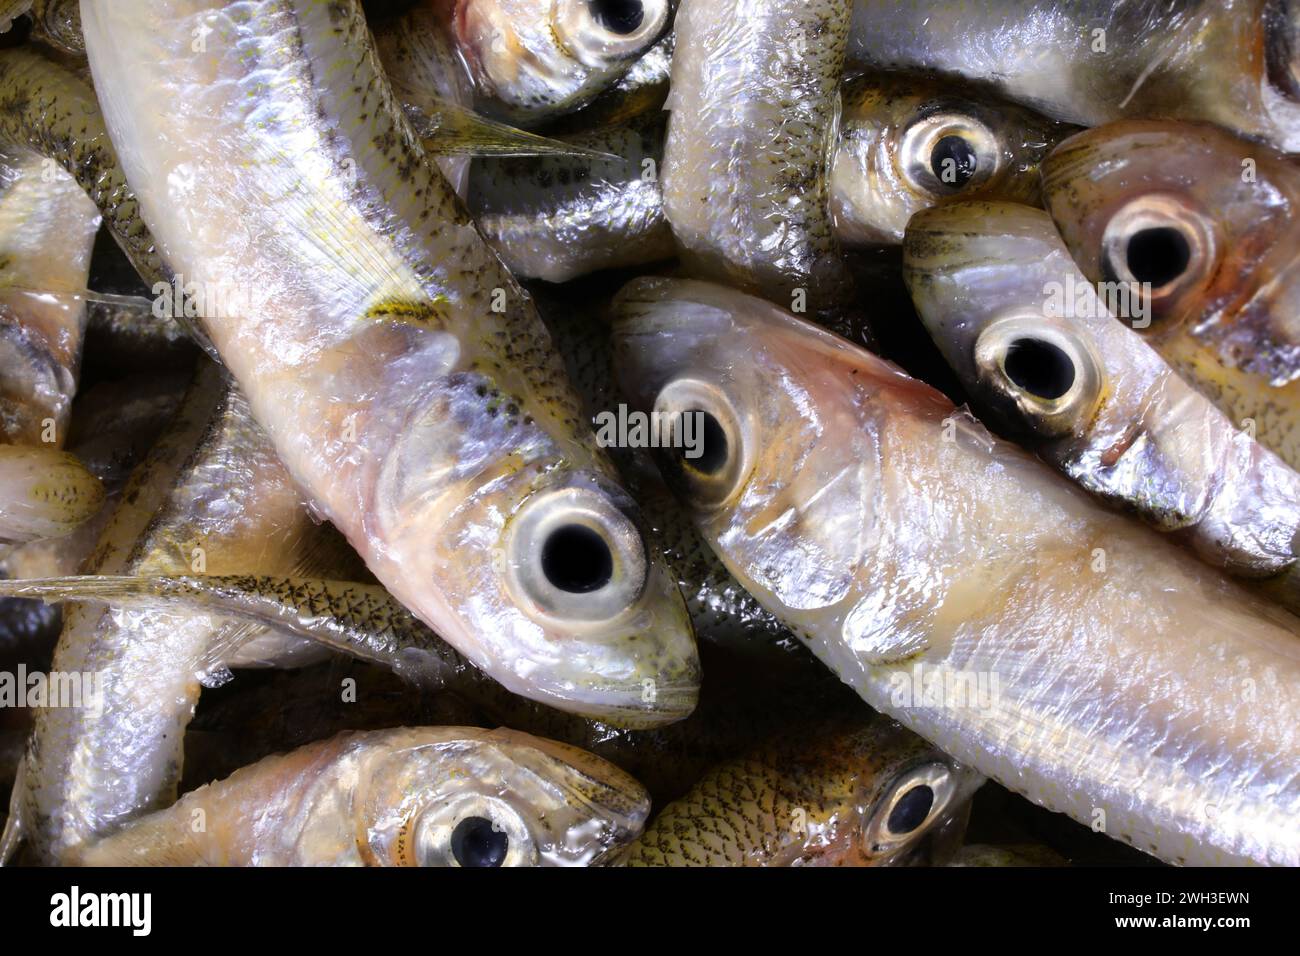 Many caught fish called sand smelt of  the family Atherinidae  are very appreciated in the Italian and mediterranean cuisines Stock Photo